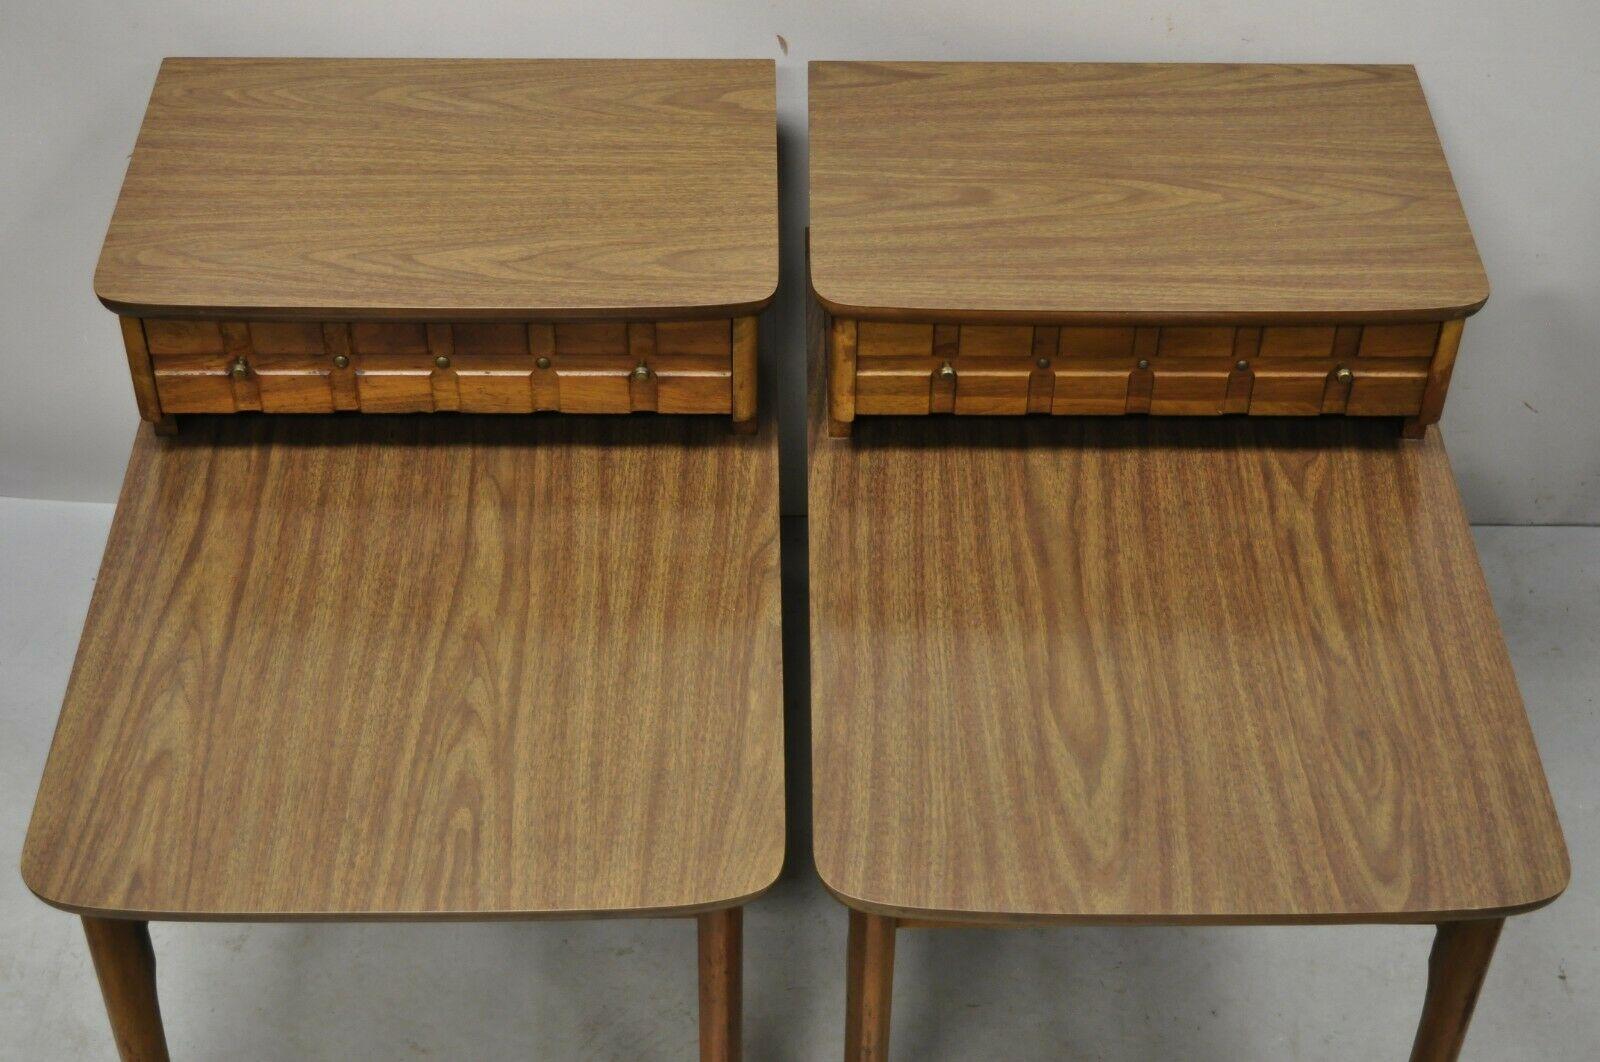 Mersman Mid Century Modern Walnut and Laminate Step Side End Tables - a Pair For Sale 3